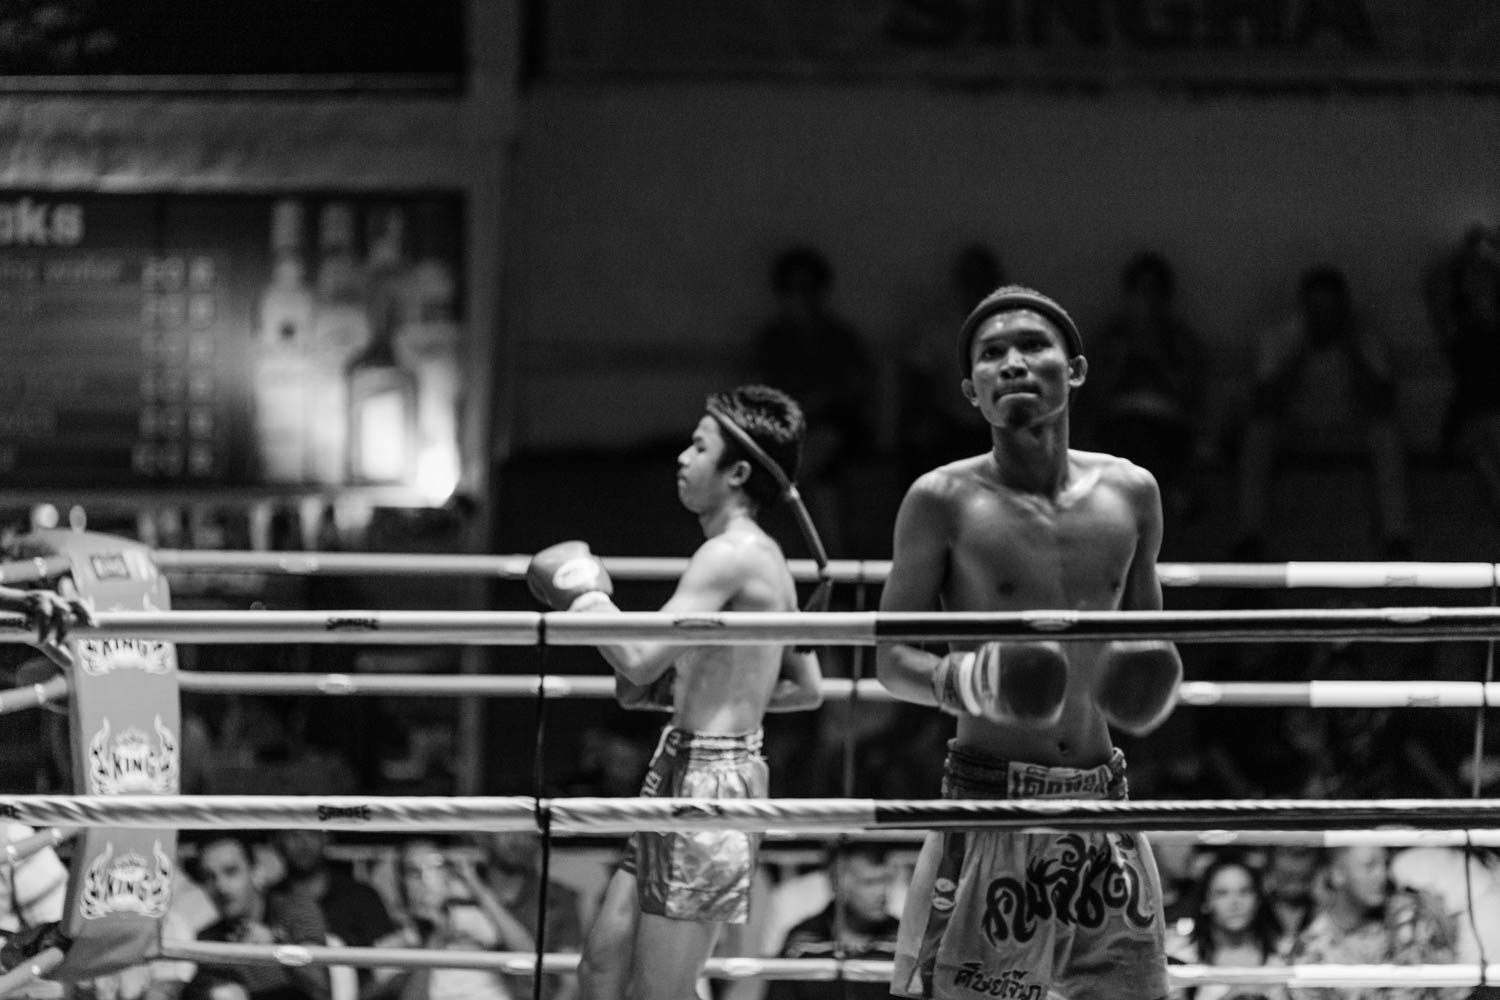 Fighters in the ring before the start of a boxing match